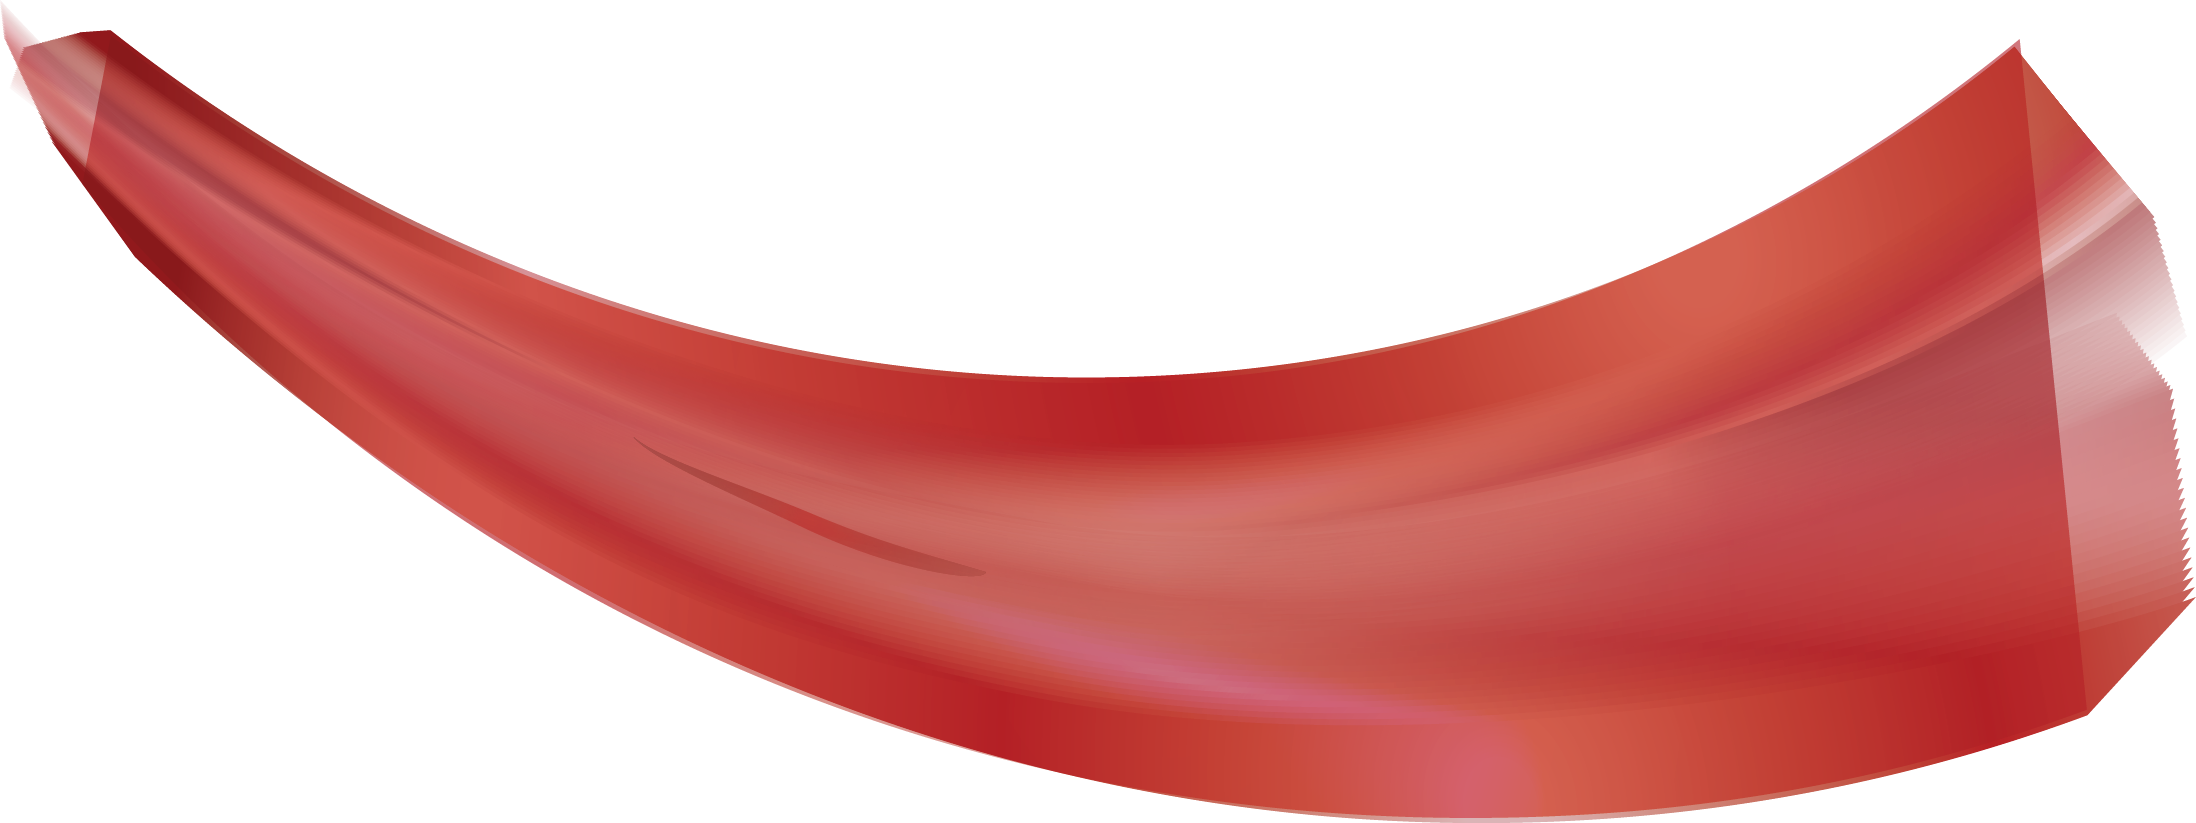 Download PNG image - Red Wave PNG Picture 